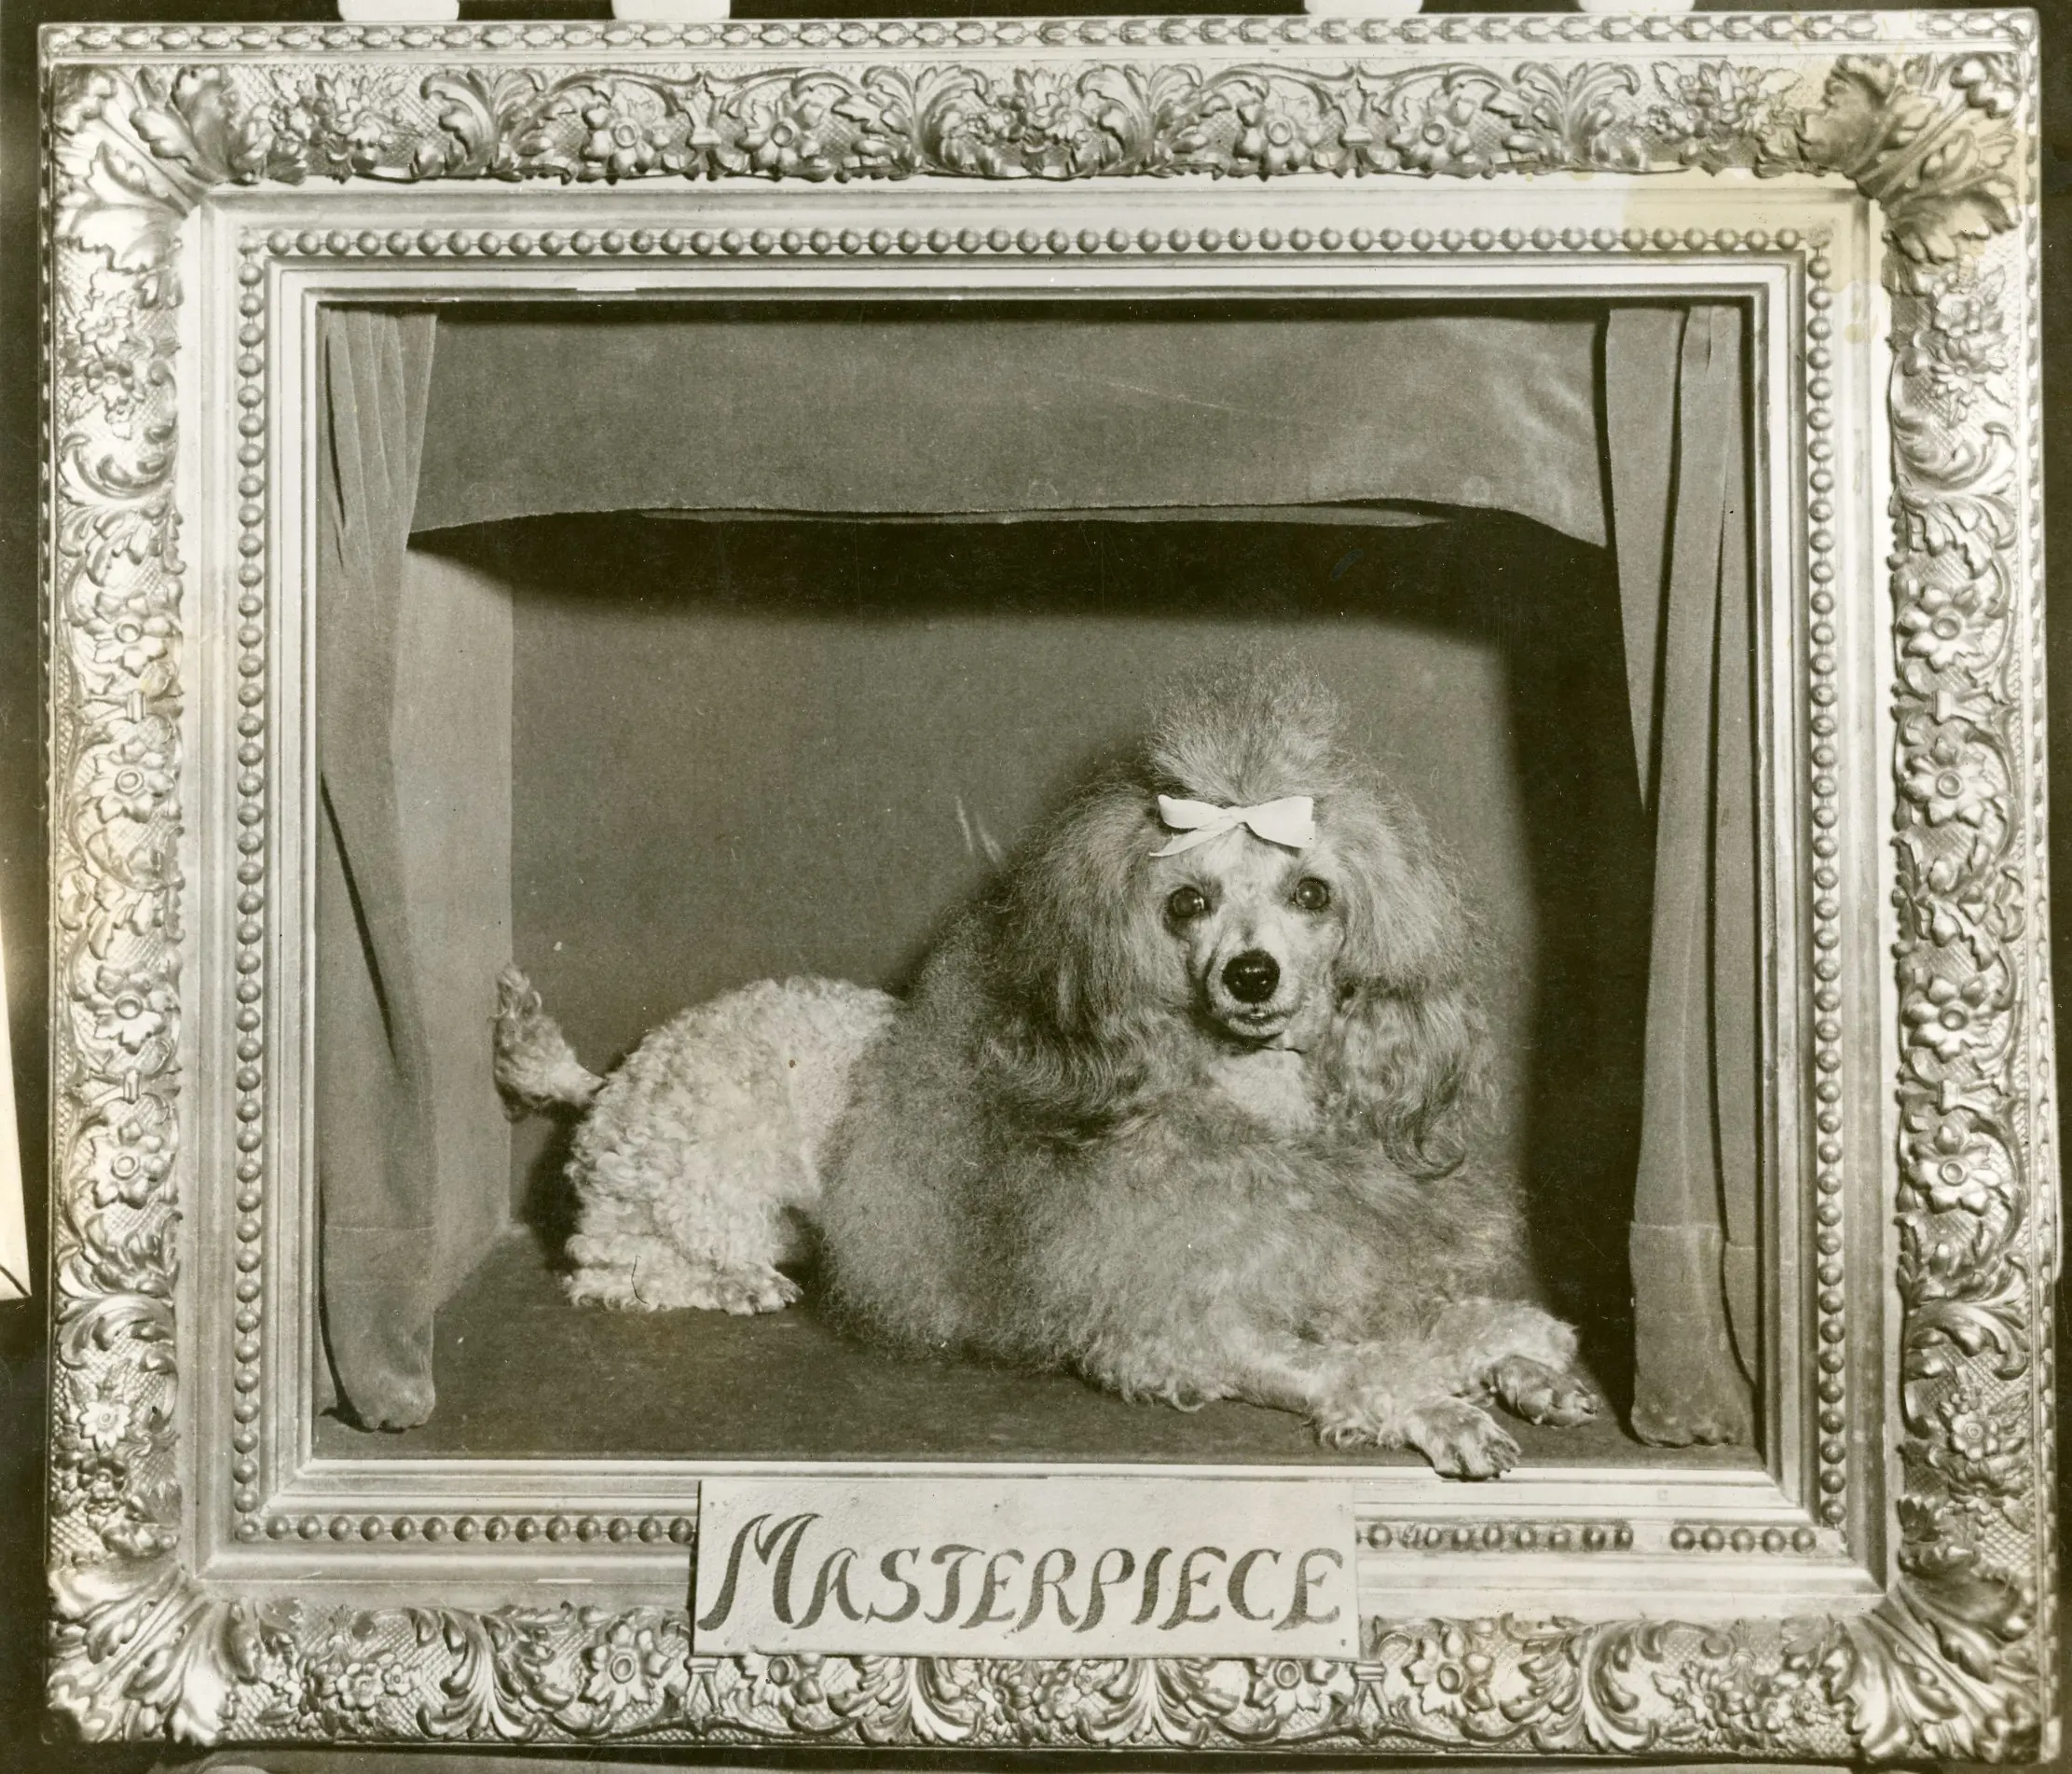 The Disappearance of Masterpiece The Poodle: The Great Mystery